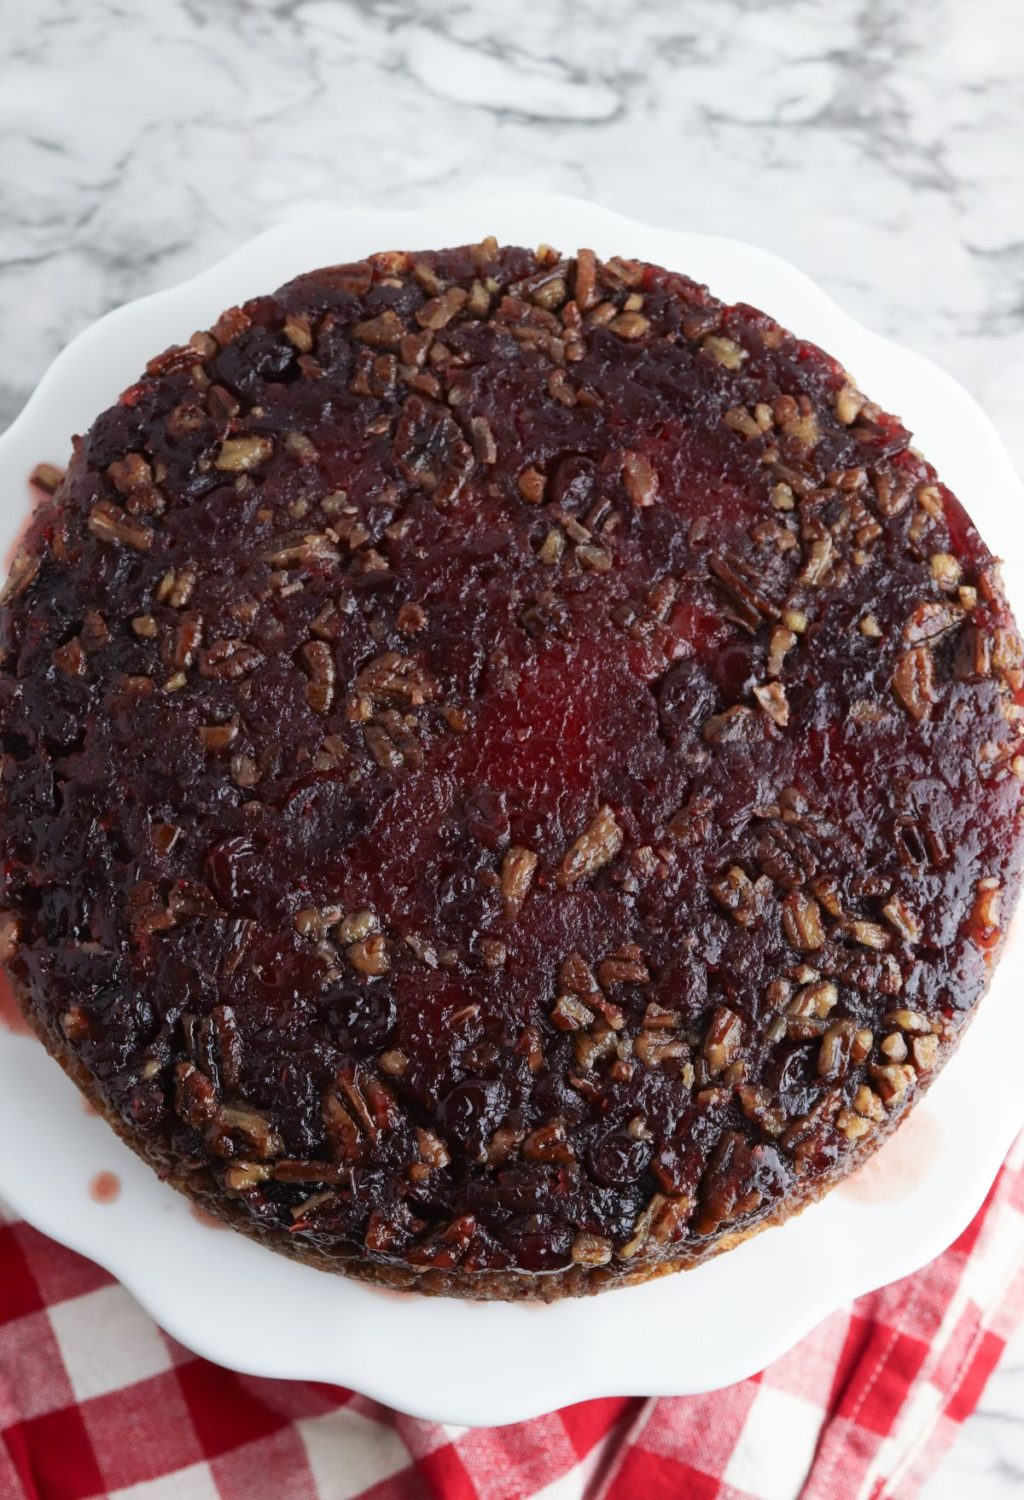 A cranberry pecan cake on a plate with a checkered tablecloth.